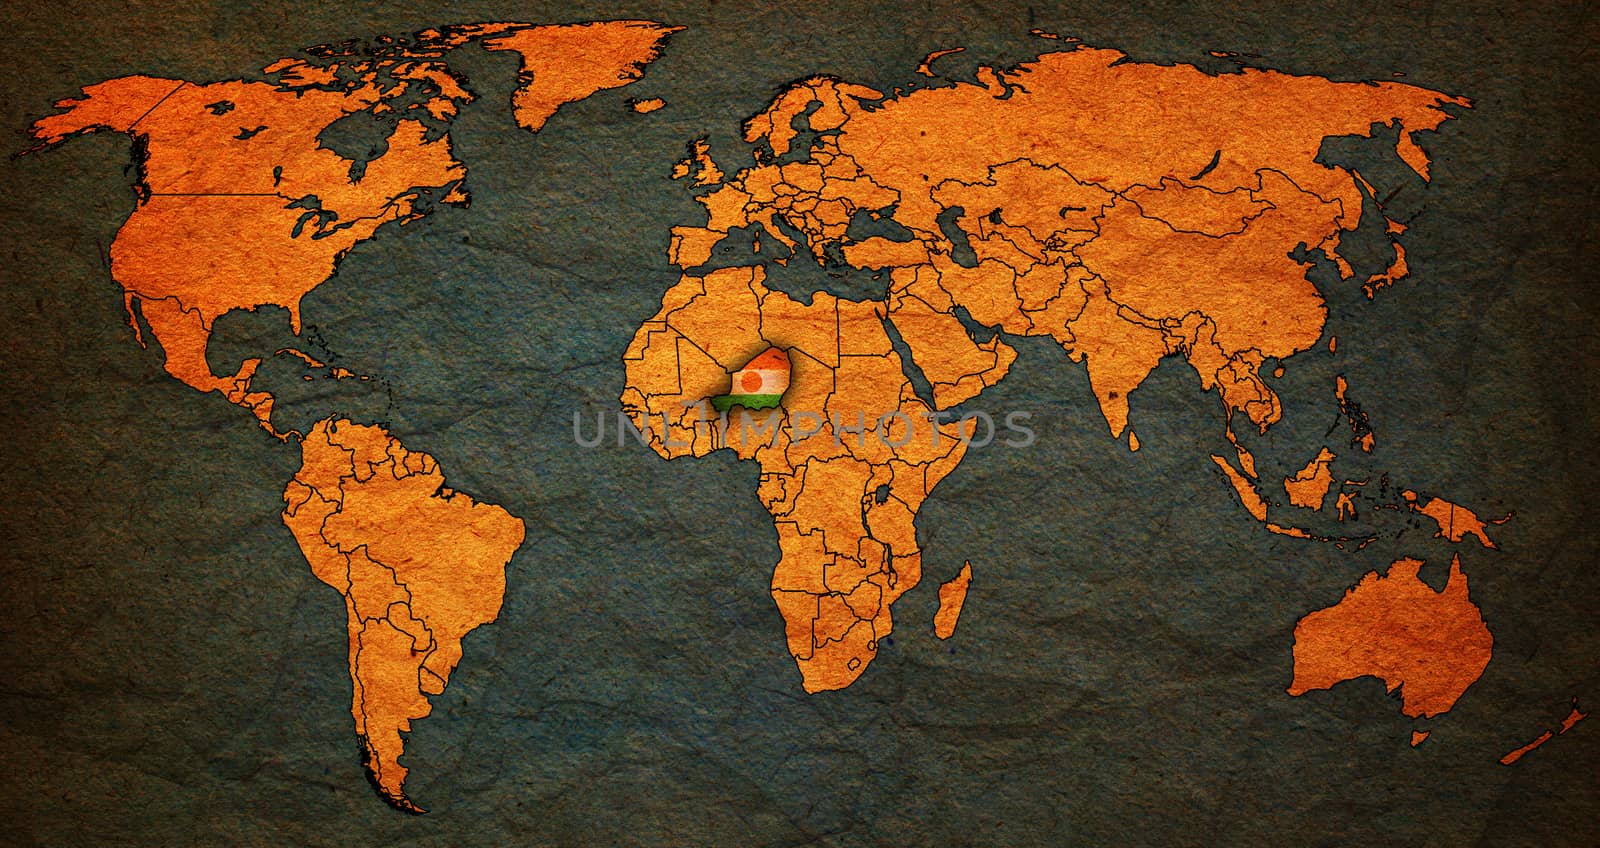 niger flag on old vintage world map with national borders